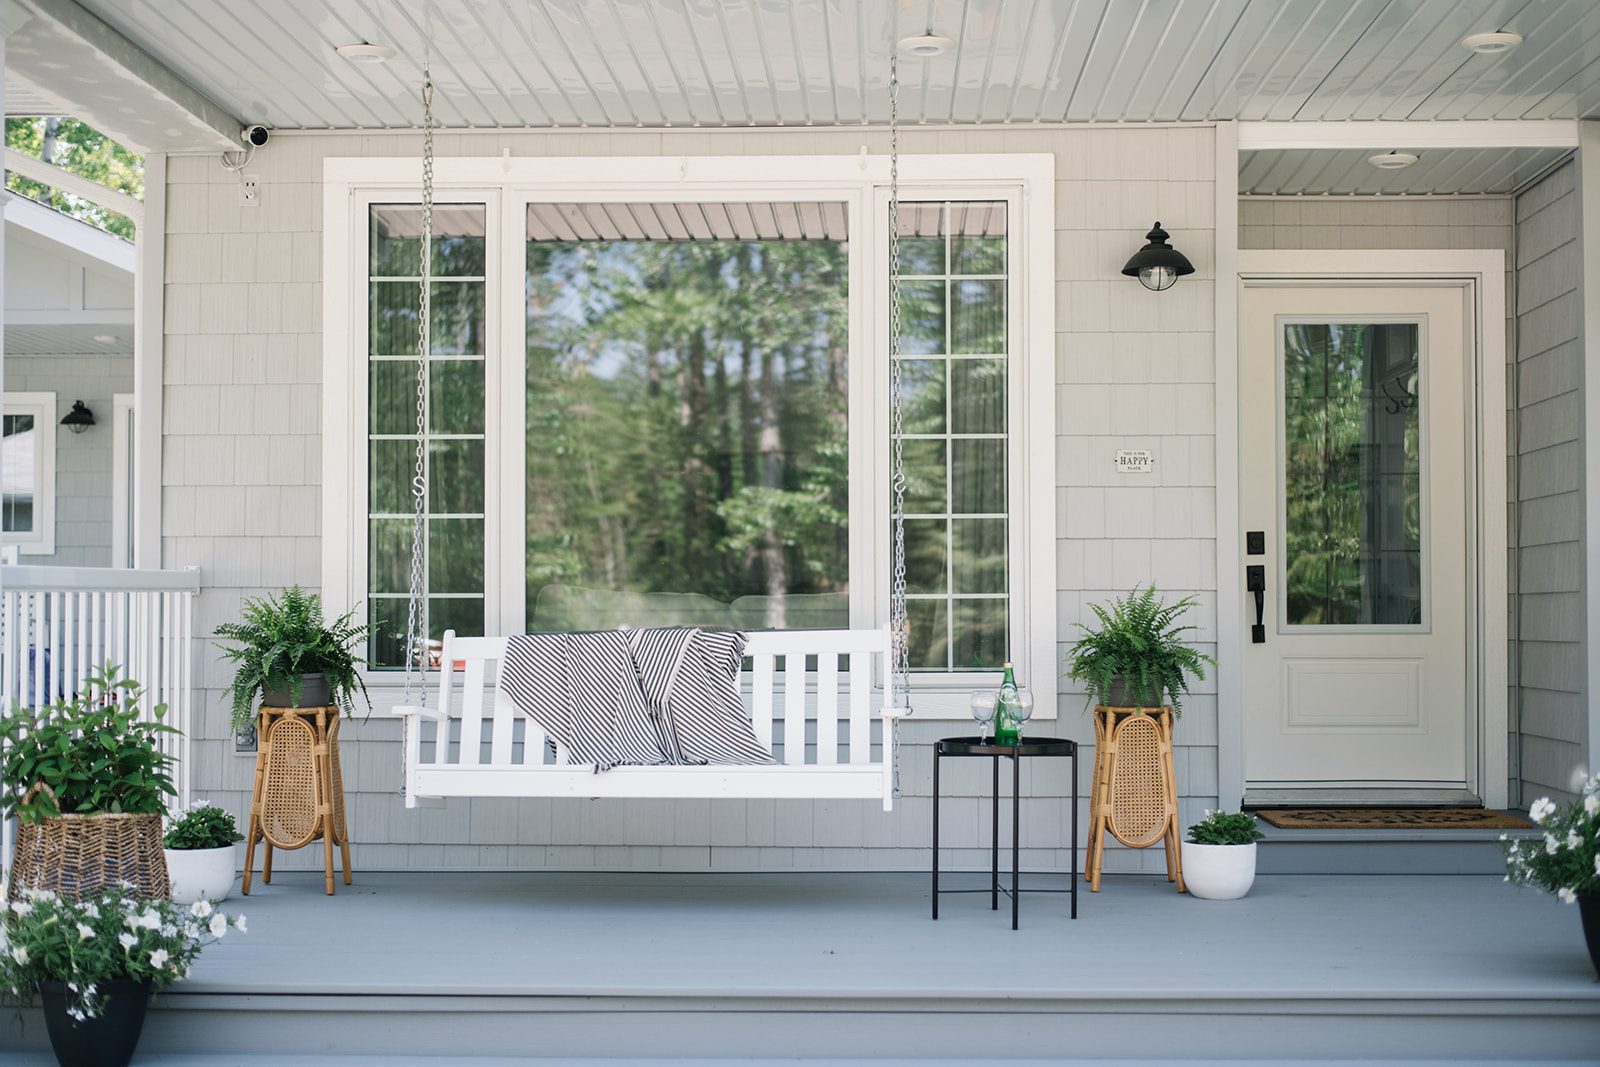 Summer front porch inspiration - porch swing, greenery and white blooms